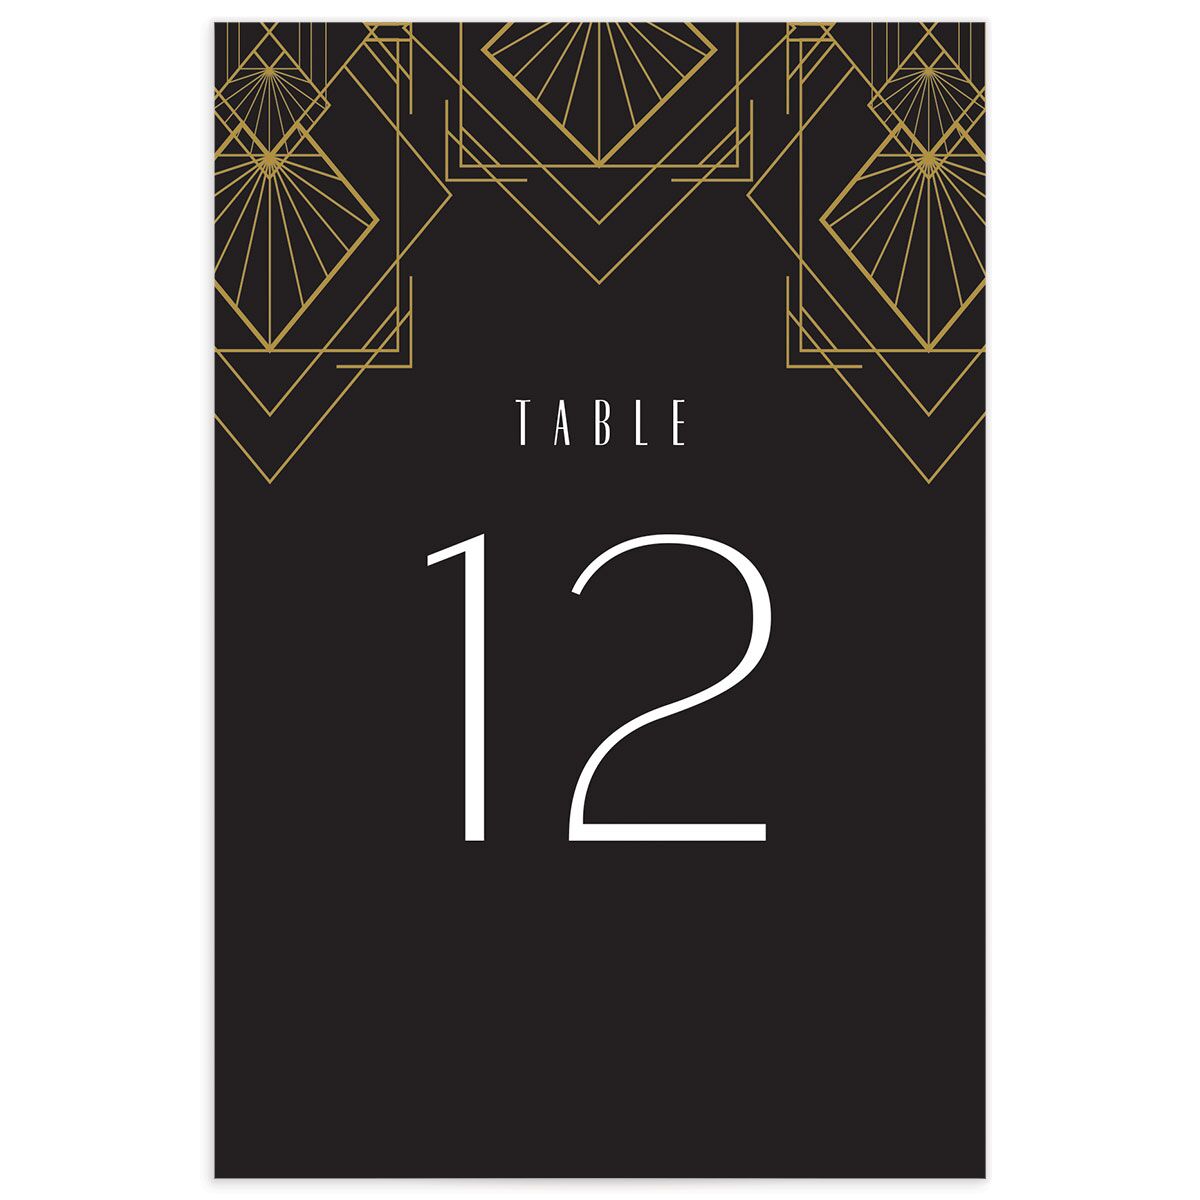 Statement Deco Table Numbers front in Midnight